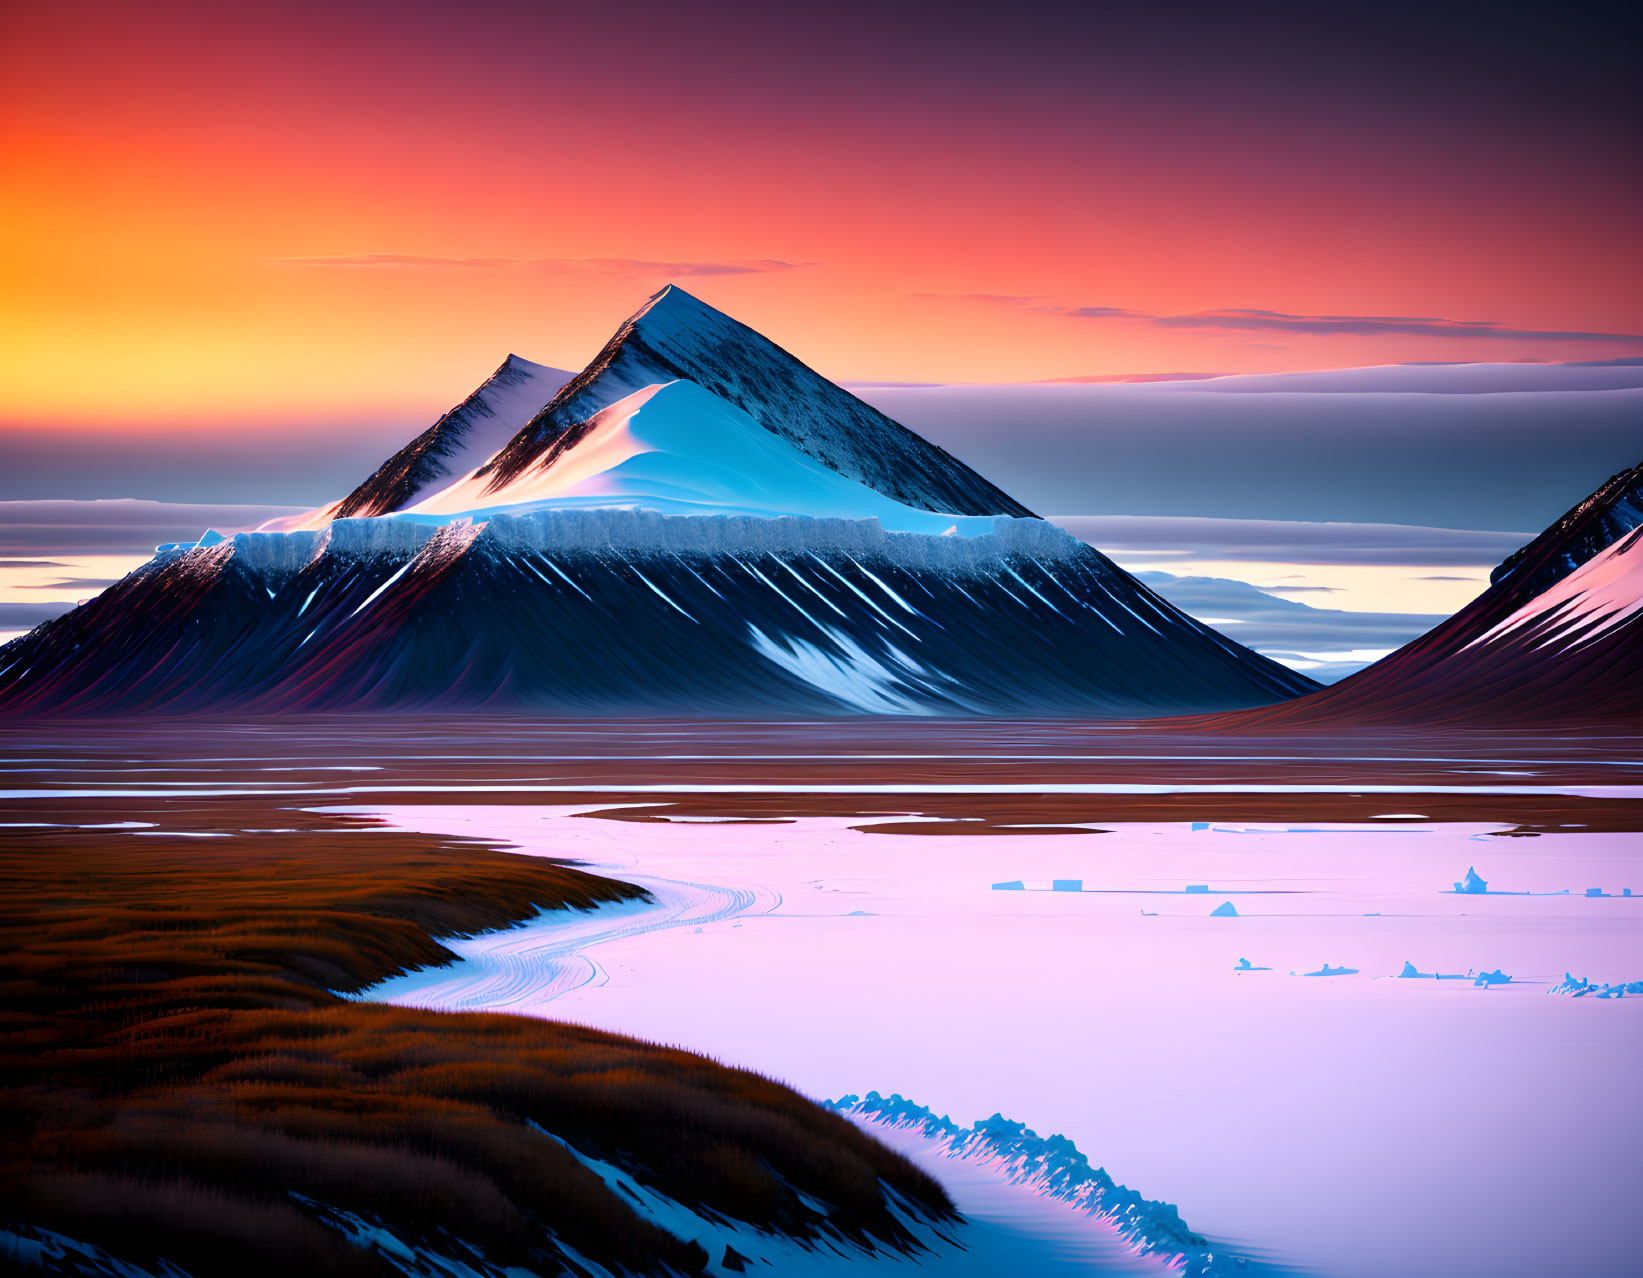 Colorful sunset over snow-capped mountain with reflective water.